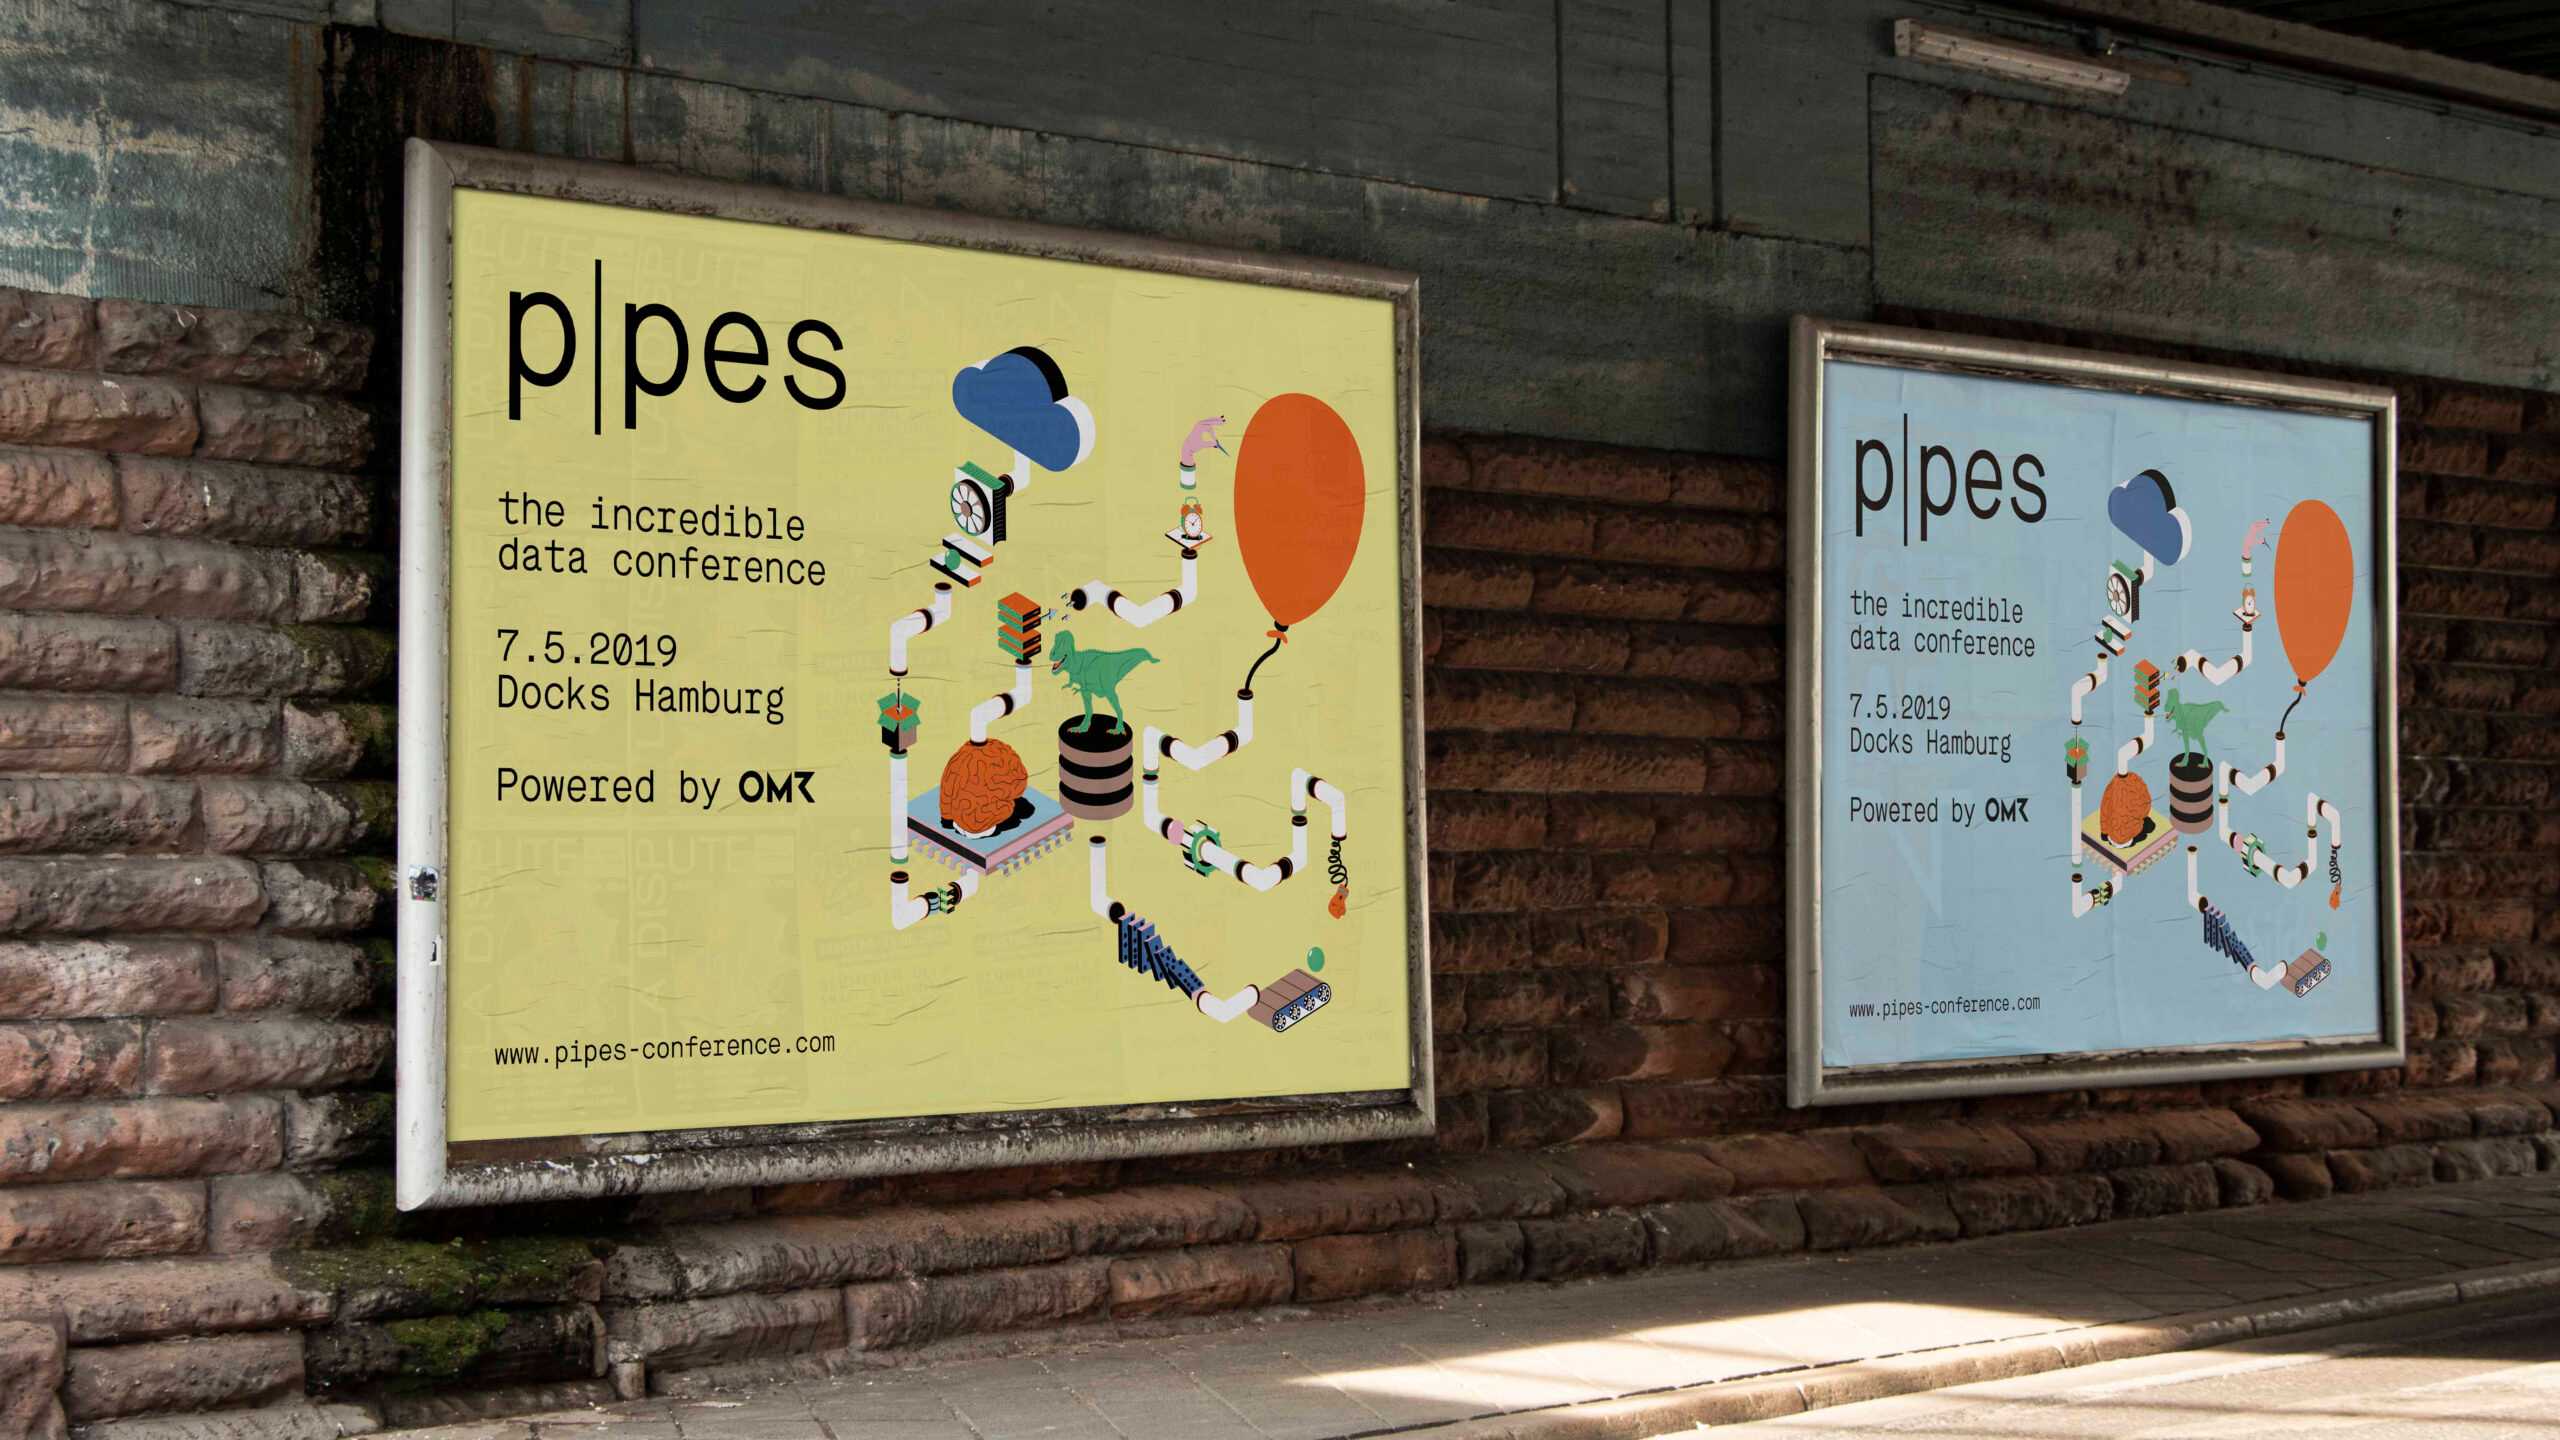 mockup of pipes conference billboards